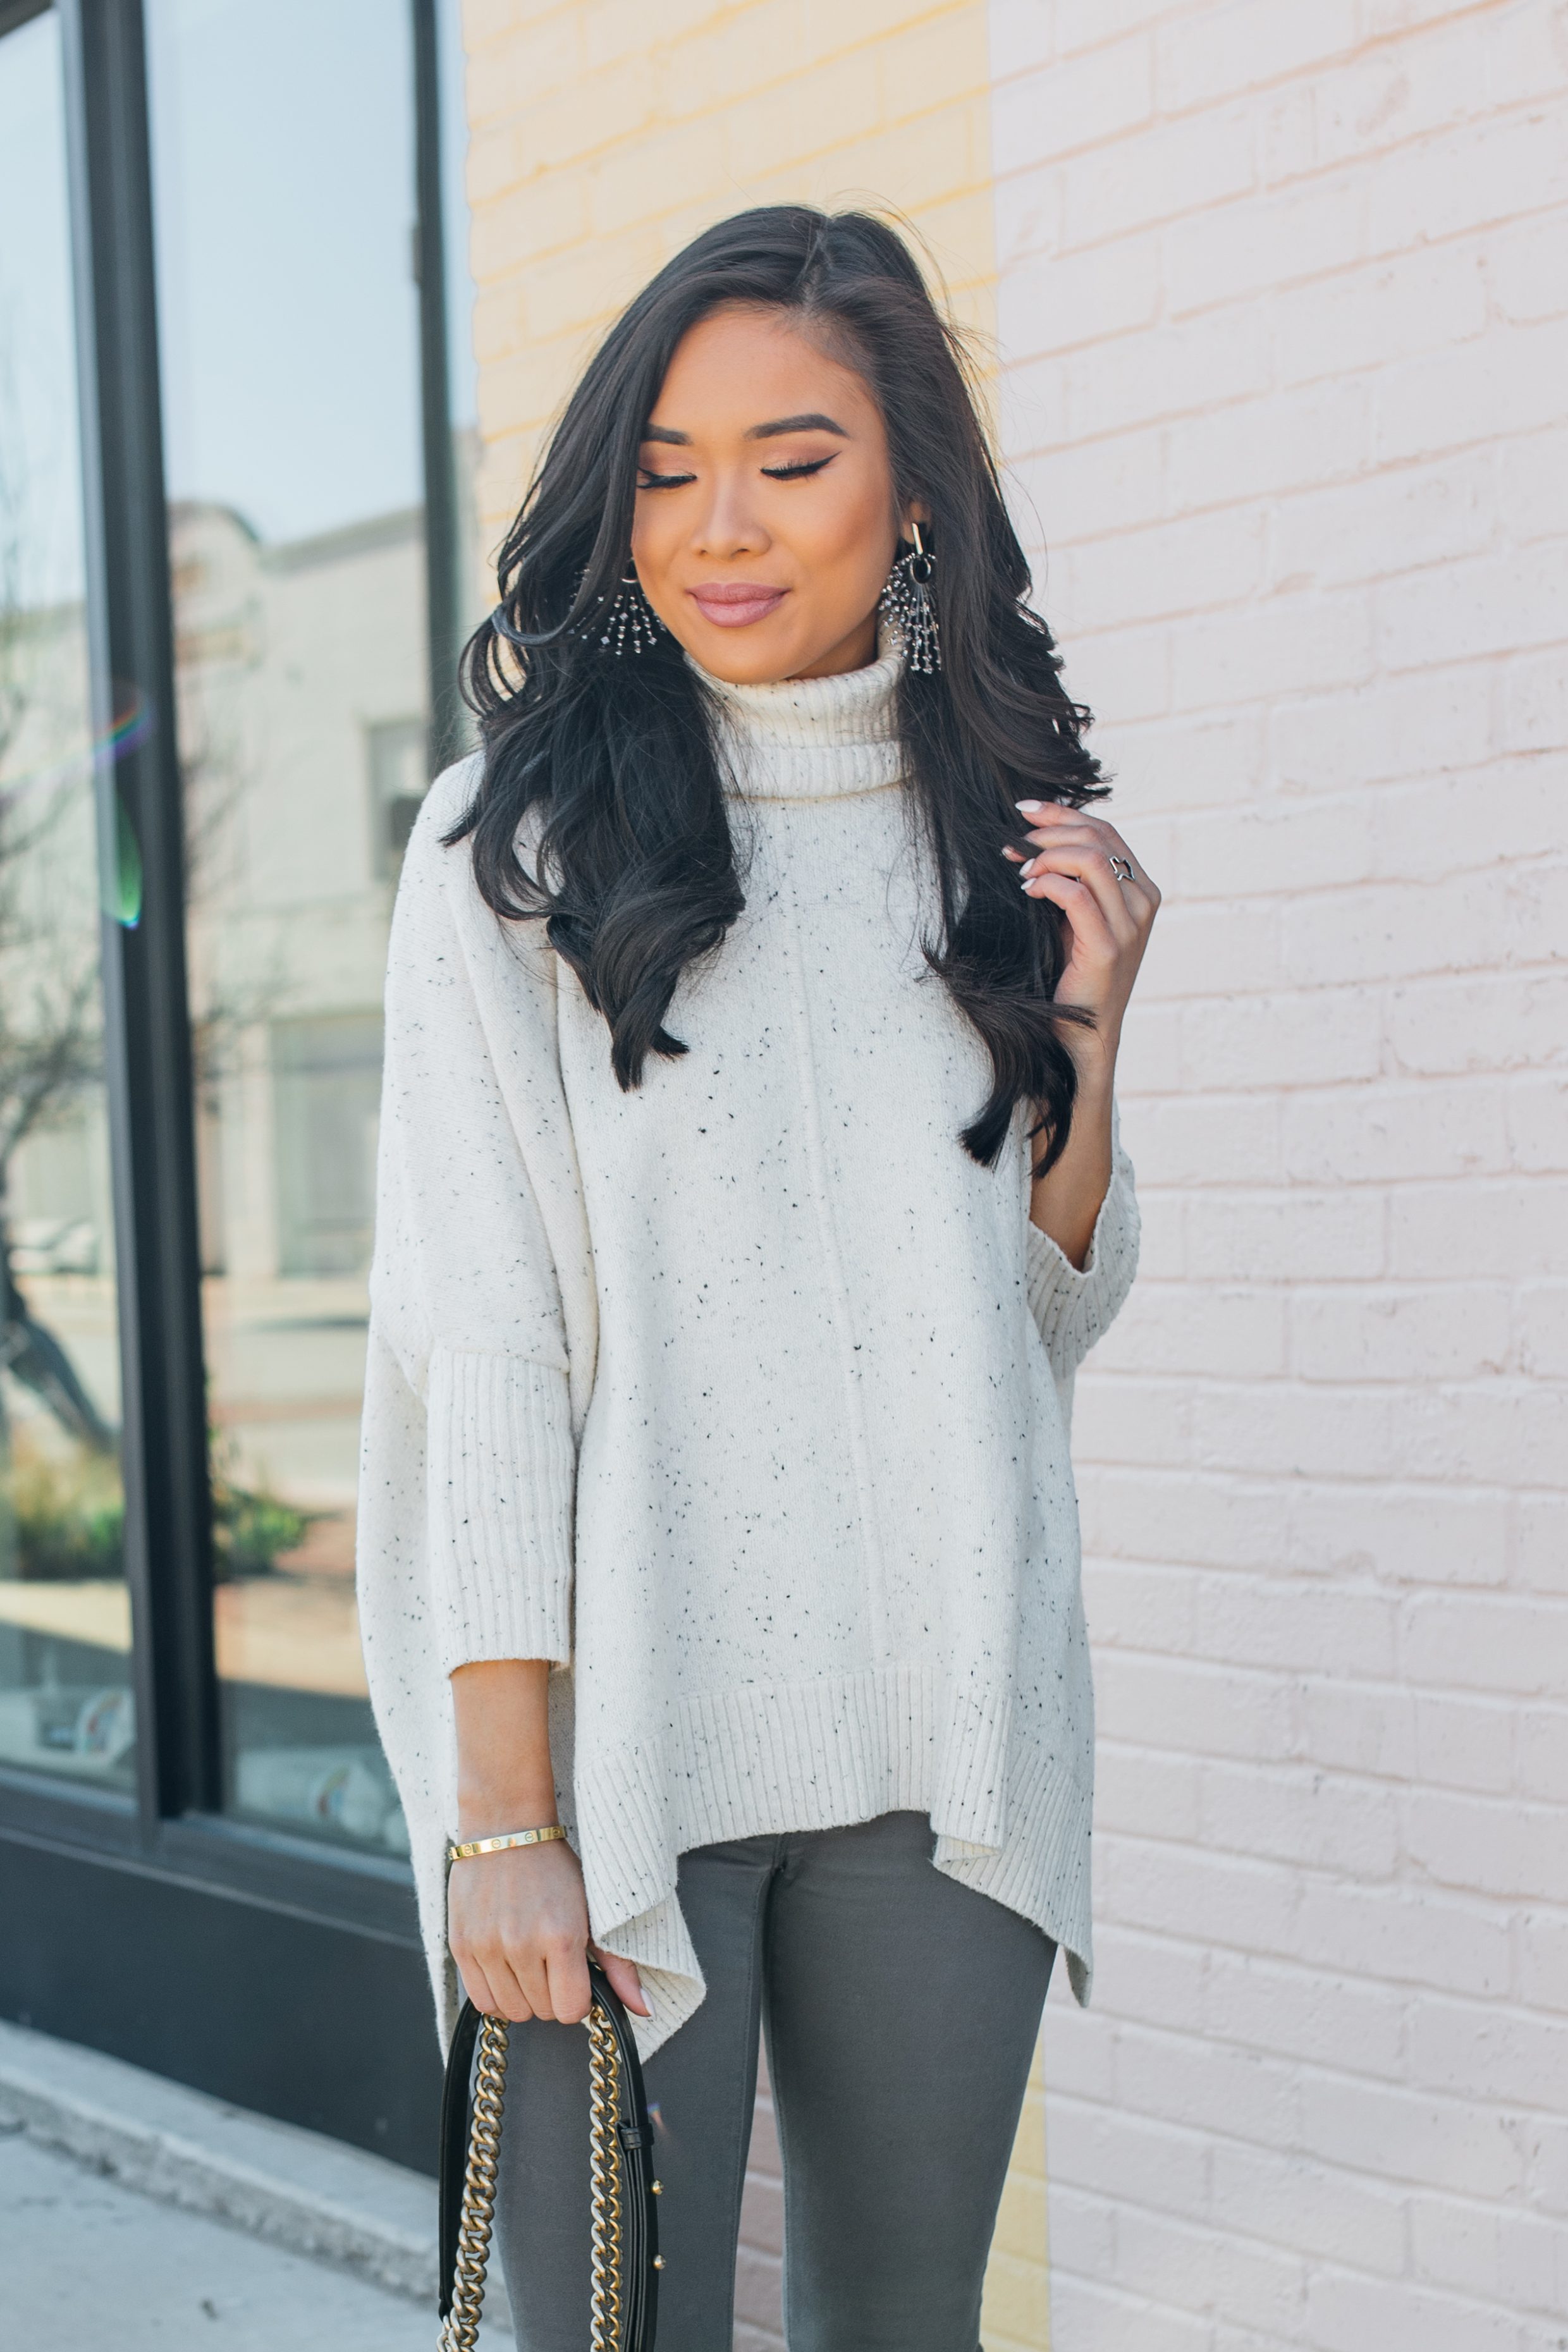 Blogger Hoang-Kim shares a casual winter outfit with a loft turtleneck poncho